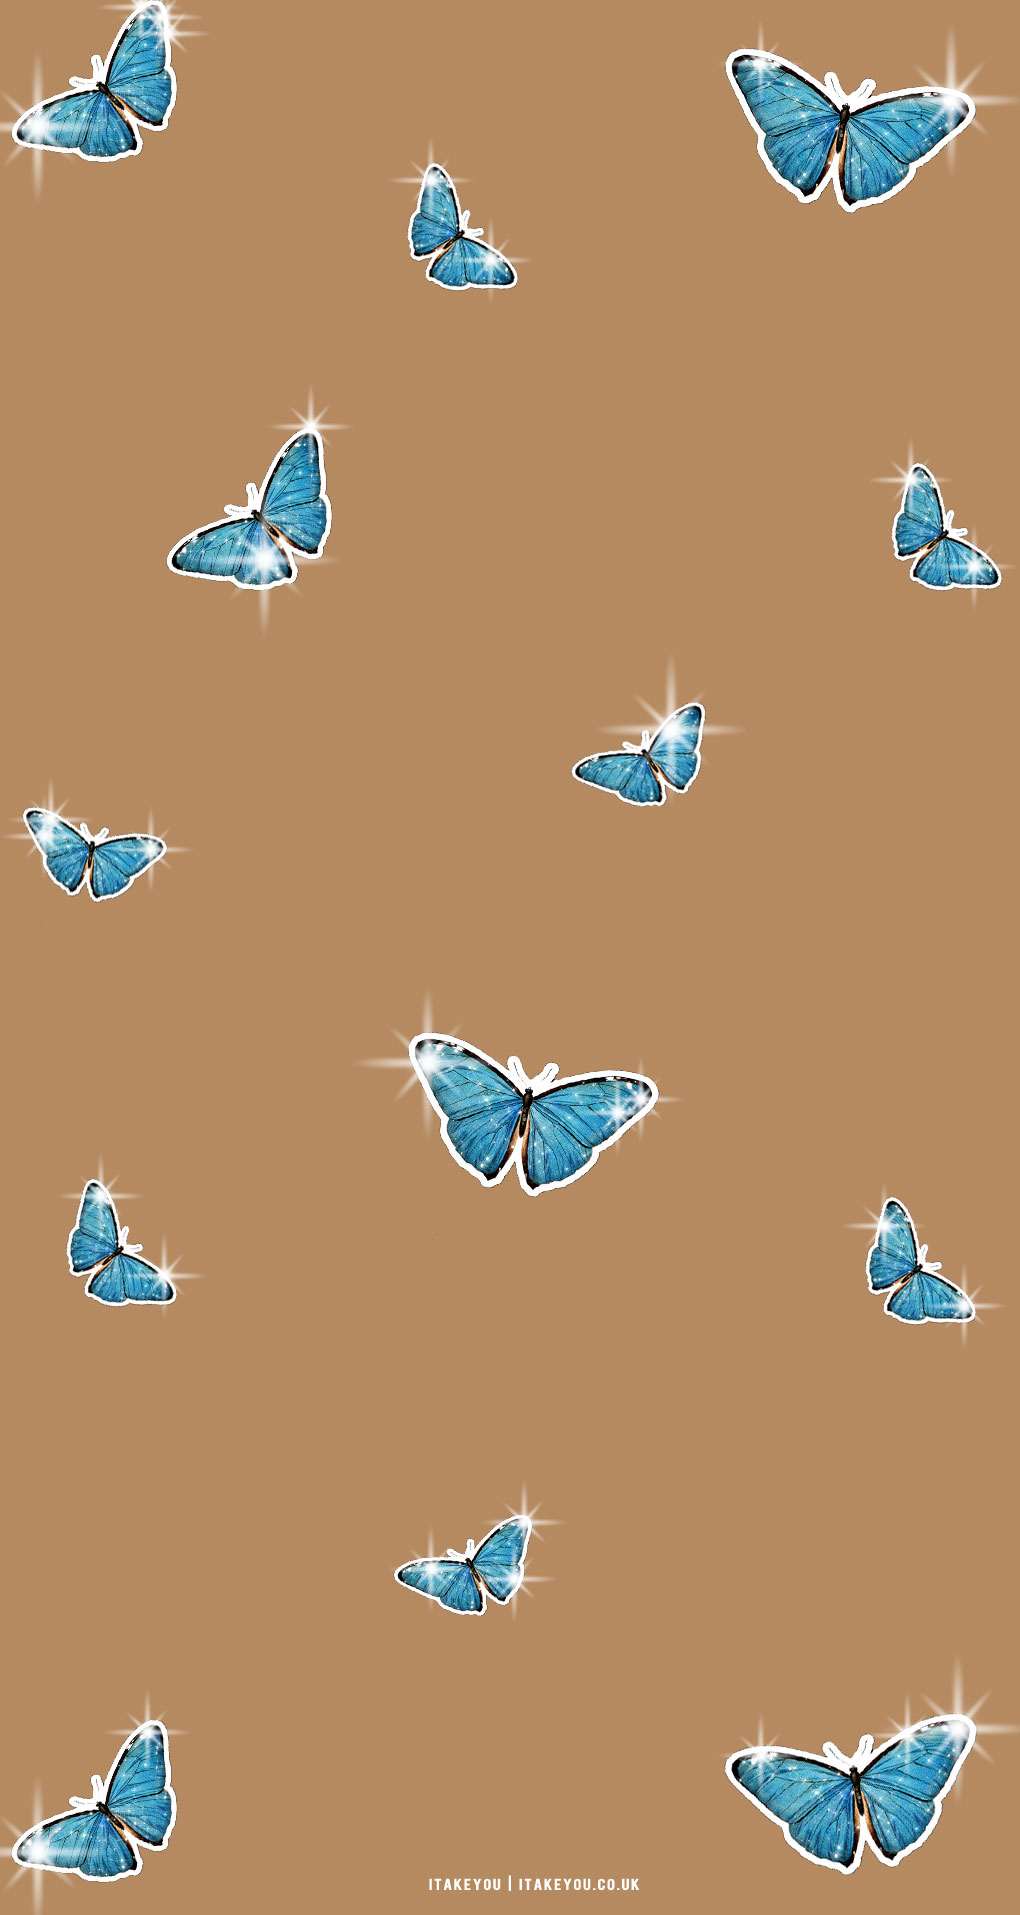 30 Cute Brown Aesthetic Wallpapers for Phone  Shiny Blue Butterflies I  Take You  Wedding Readings  Wedding Ideas  Wedding Dresses  Wedding  Theme